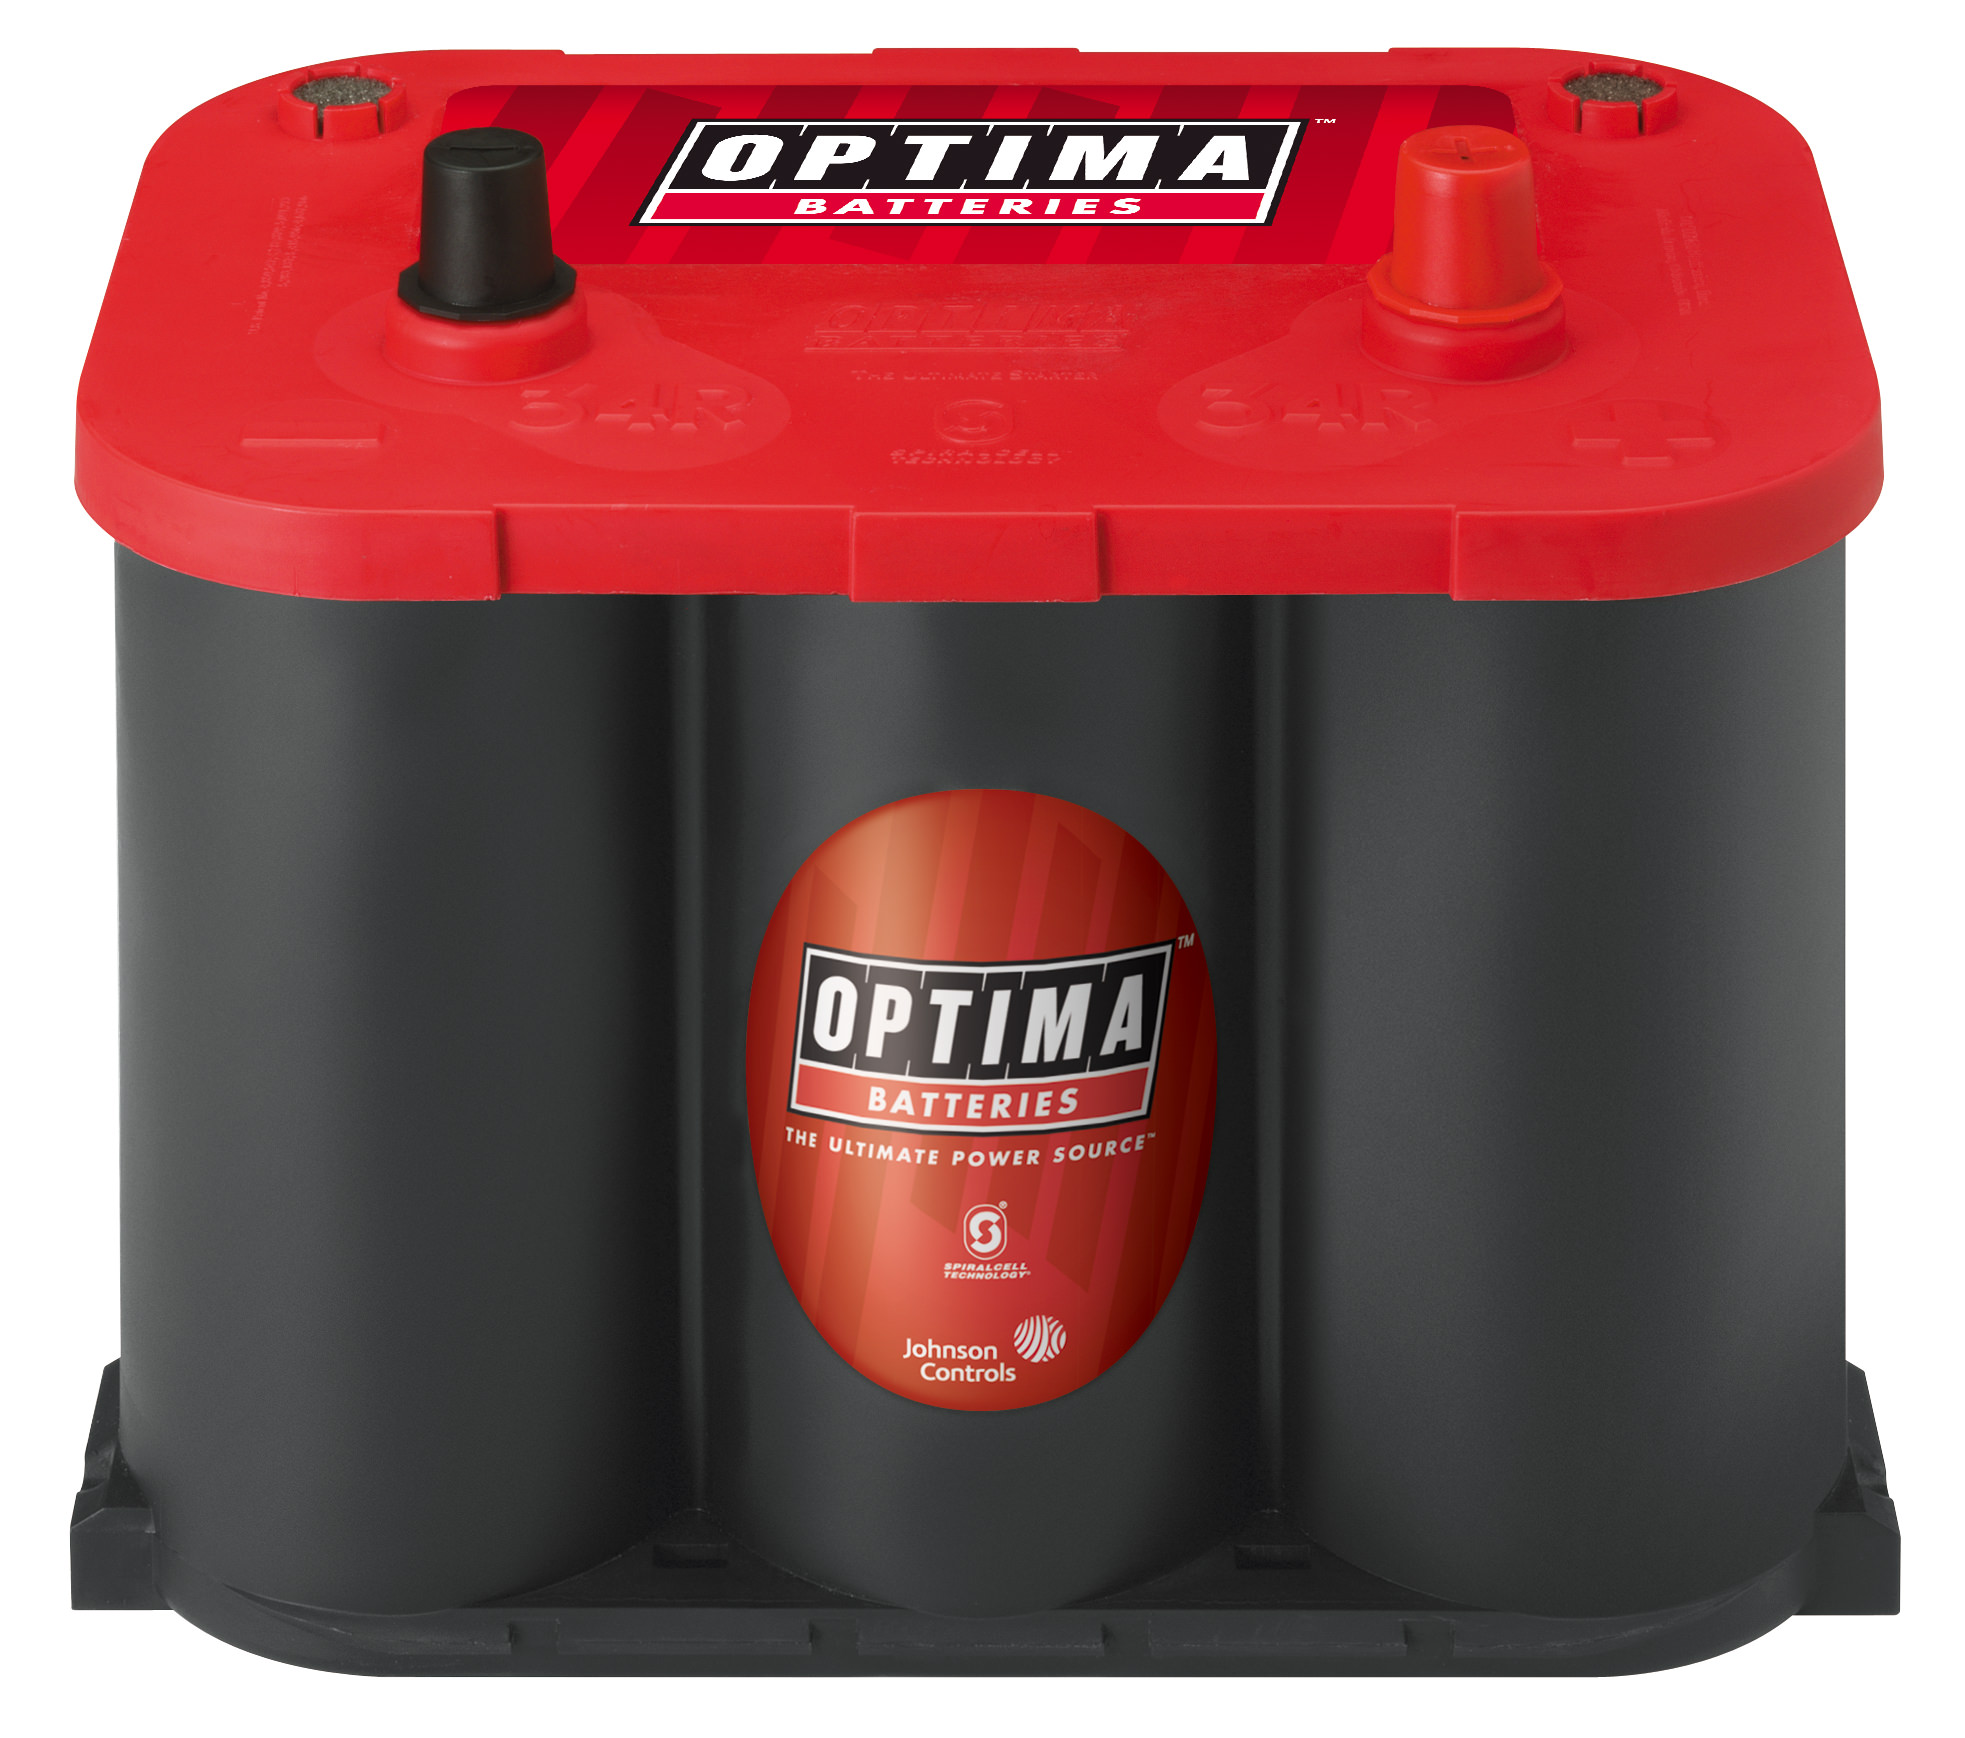 OPTIMA RedTop AGM Spiralcell Automotive Starting Battery, Group Size 34R, 12 Volt 800 CCA - image 5 of 5